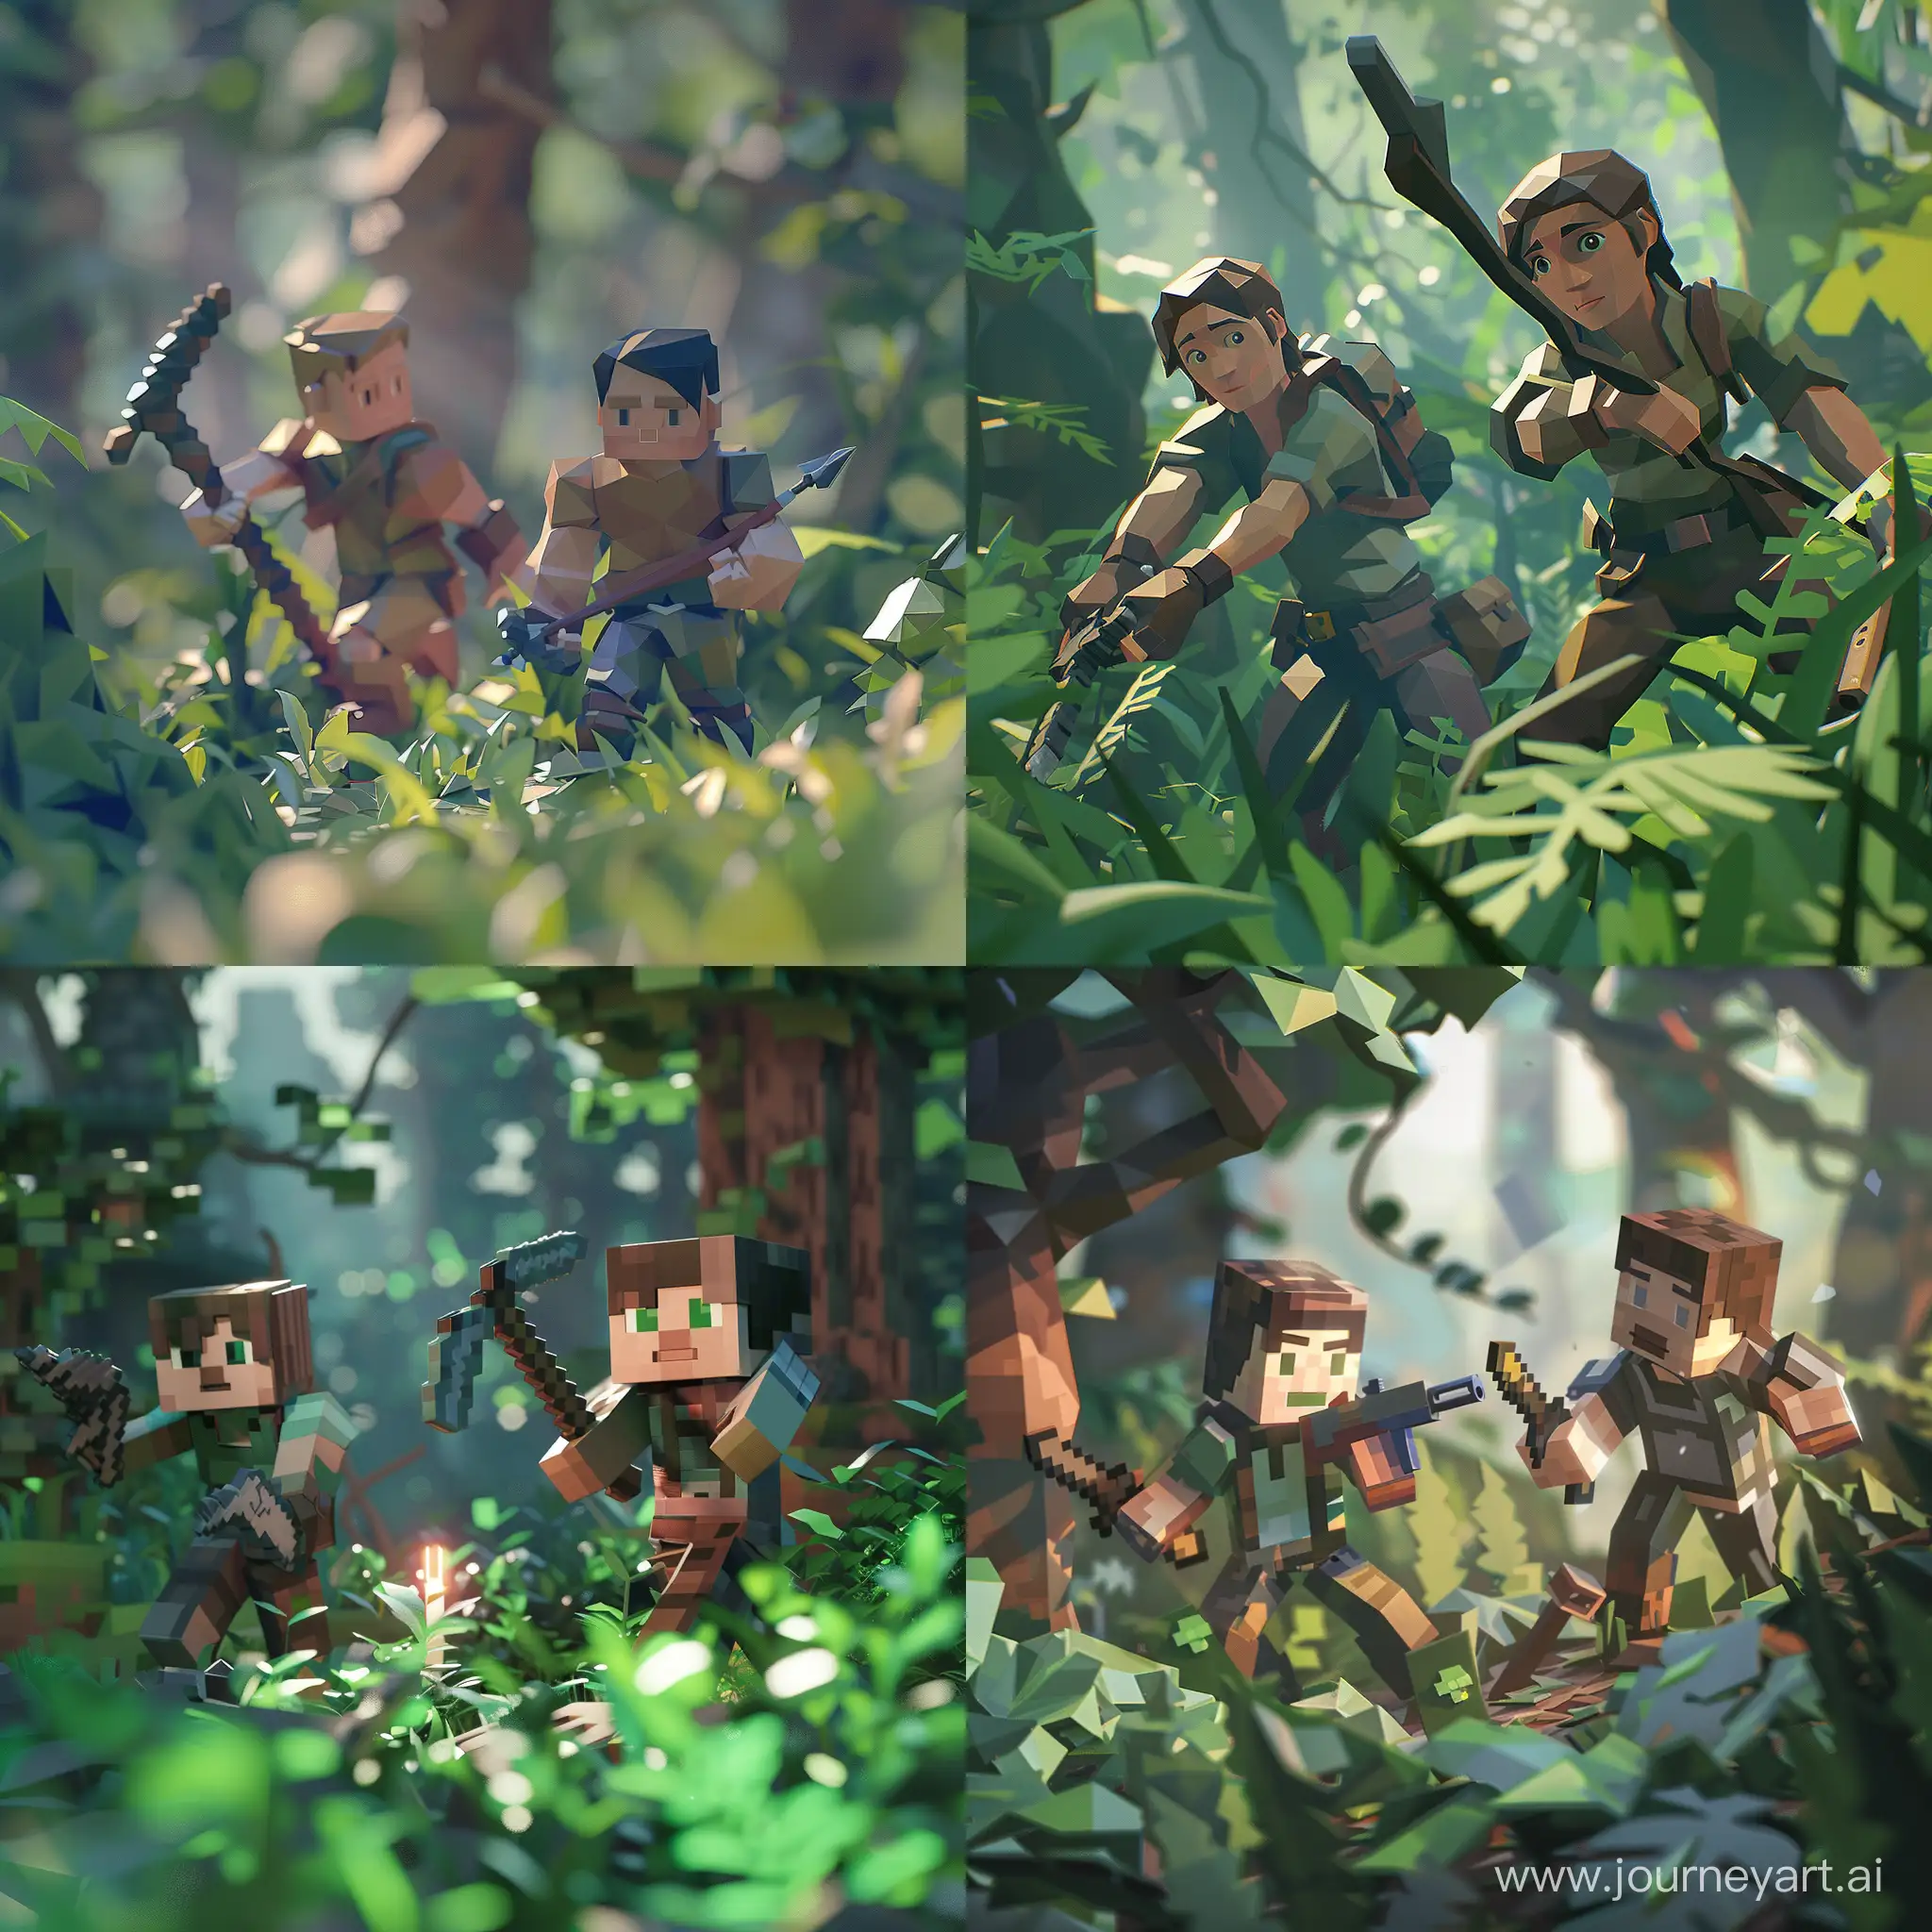 Epic-Low-Poly-Survival-Scene-Adventurous-Duo-with-Weapon-and-Pickaxe-in-Enchanting-Forest